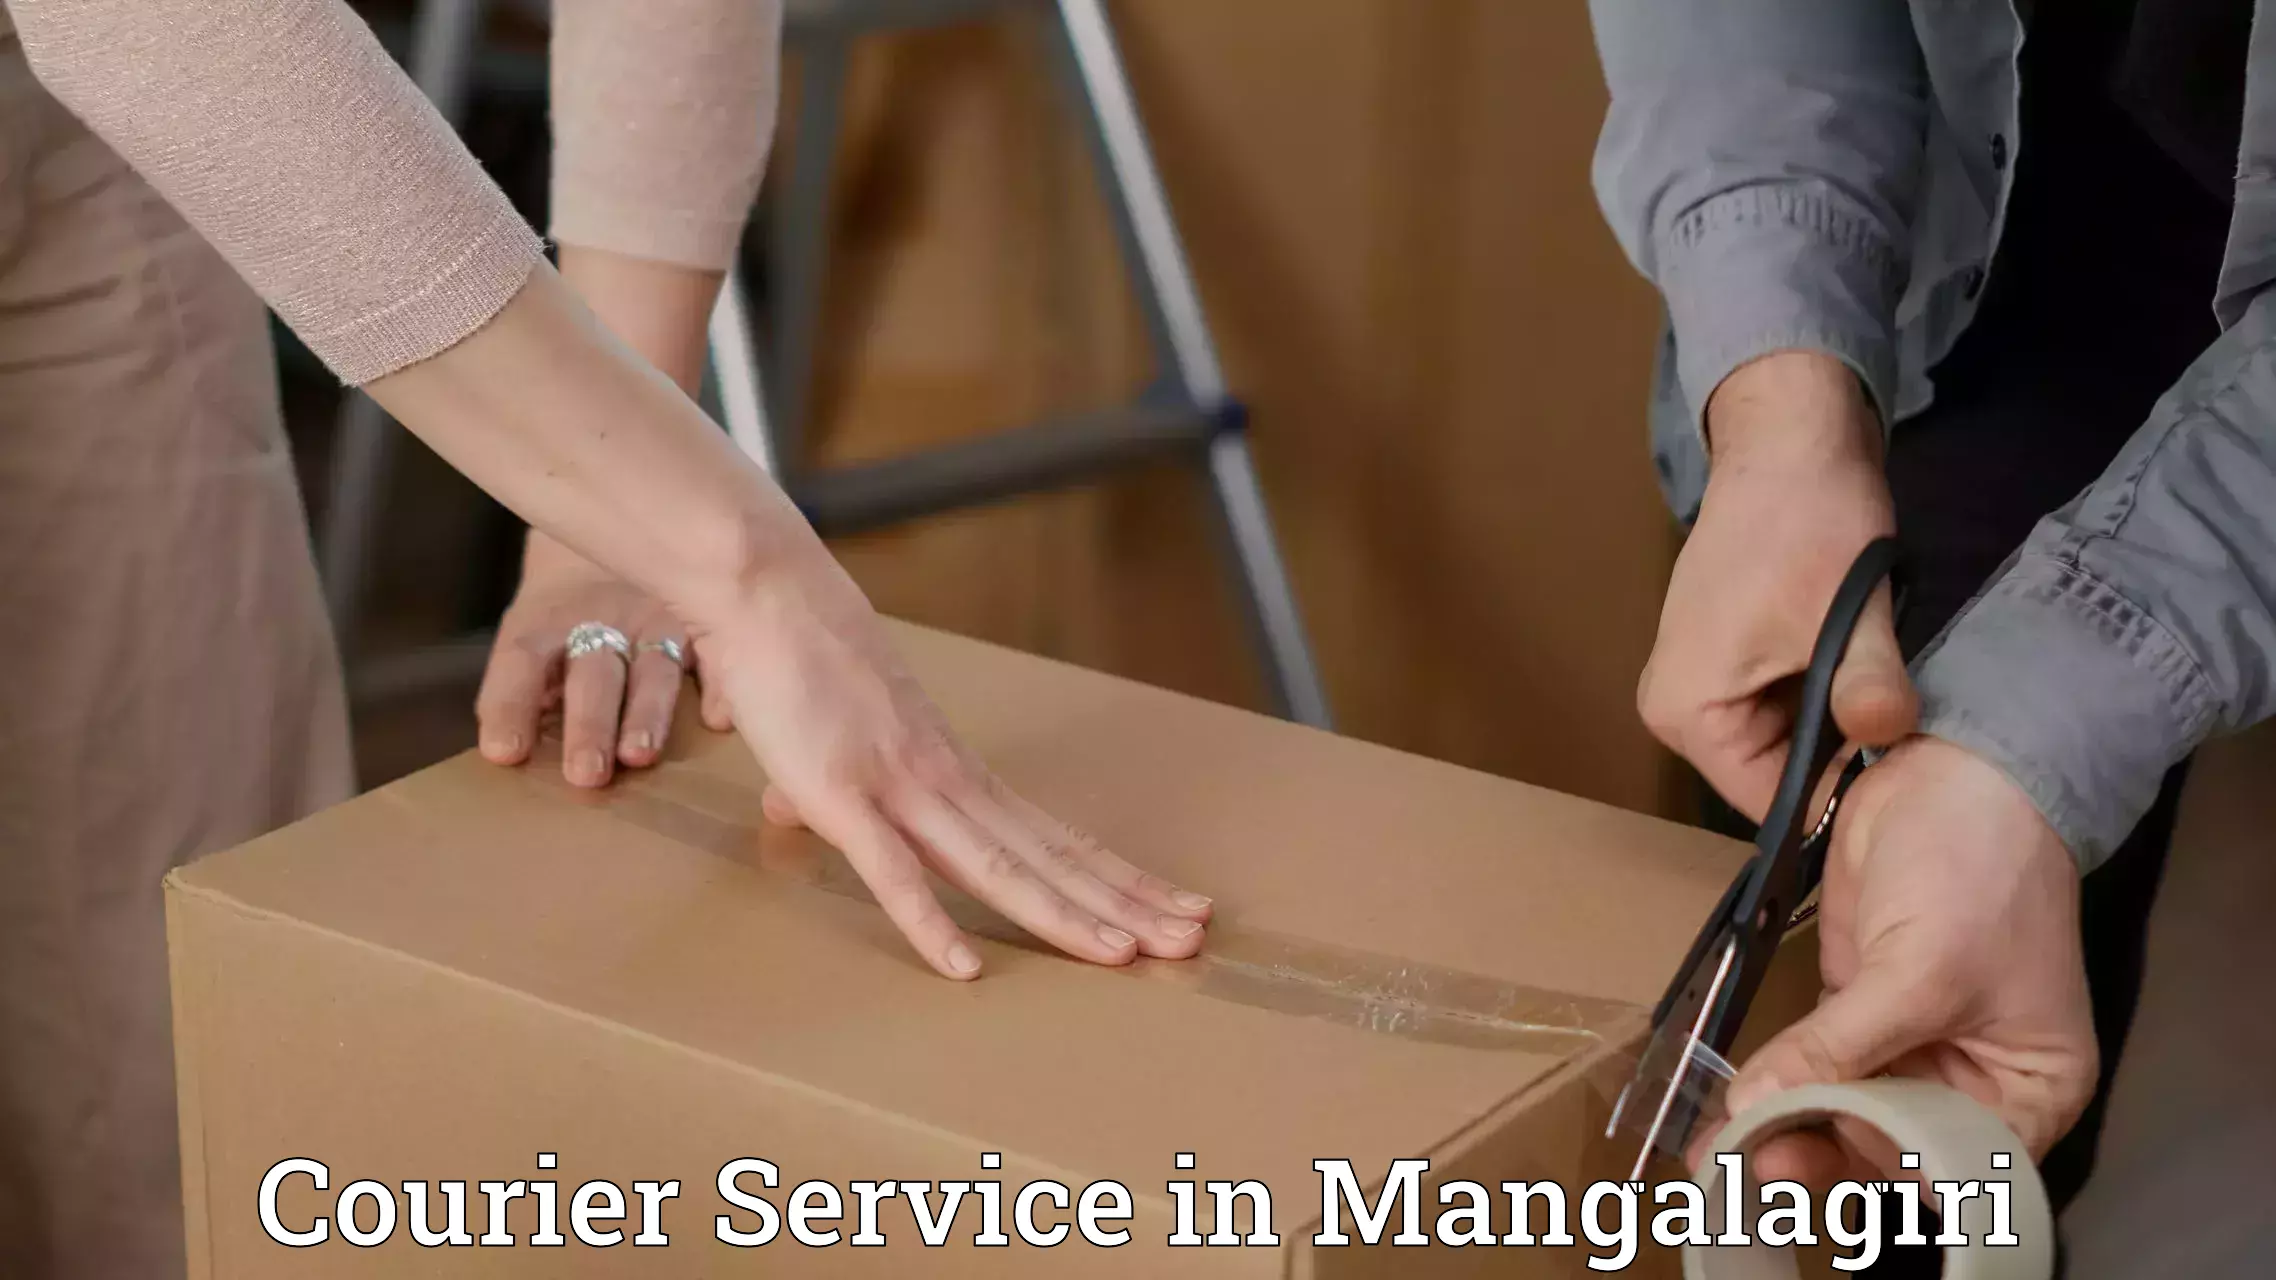 Customizable delivery plans in Mangalagiri